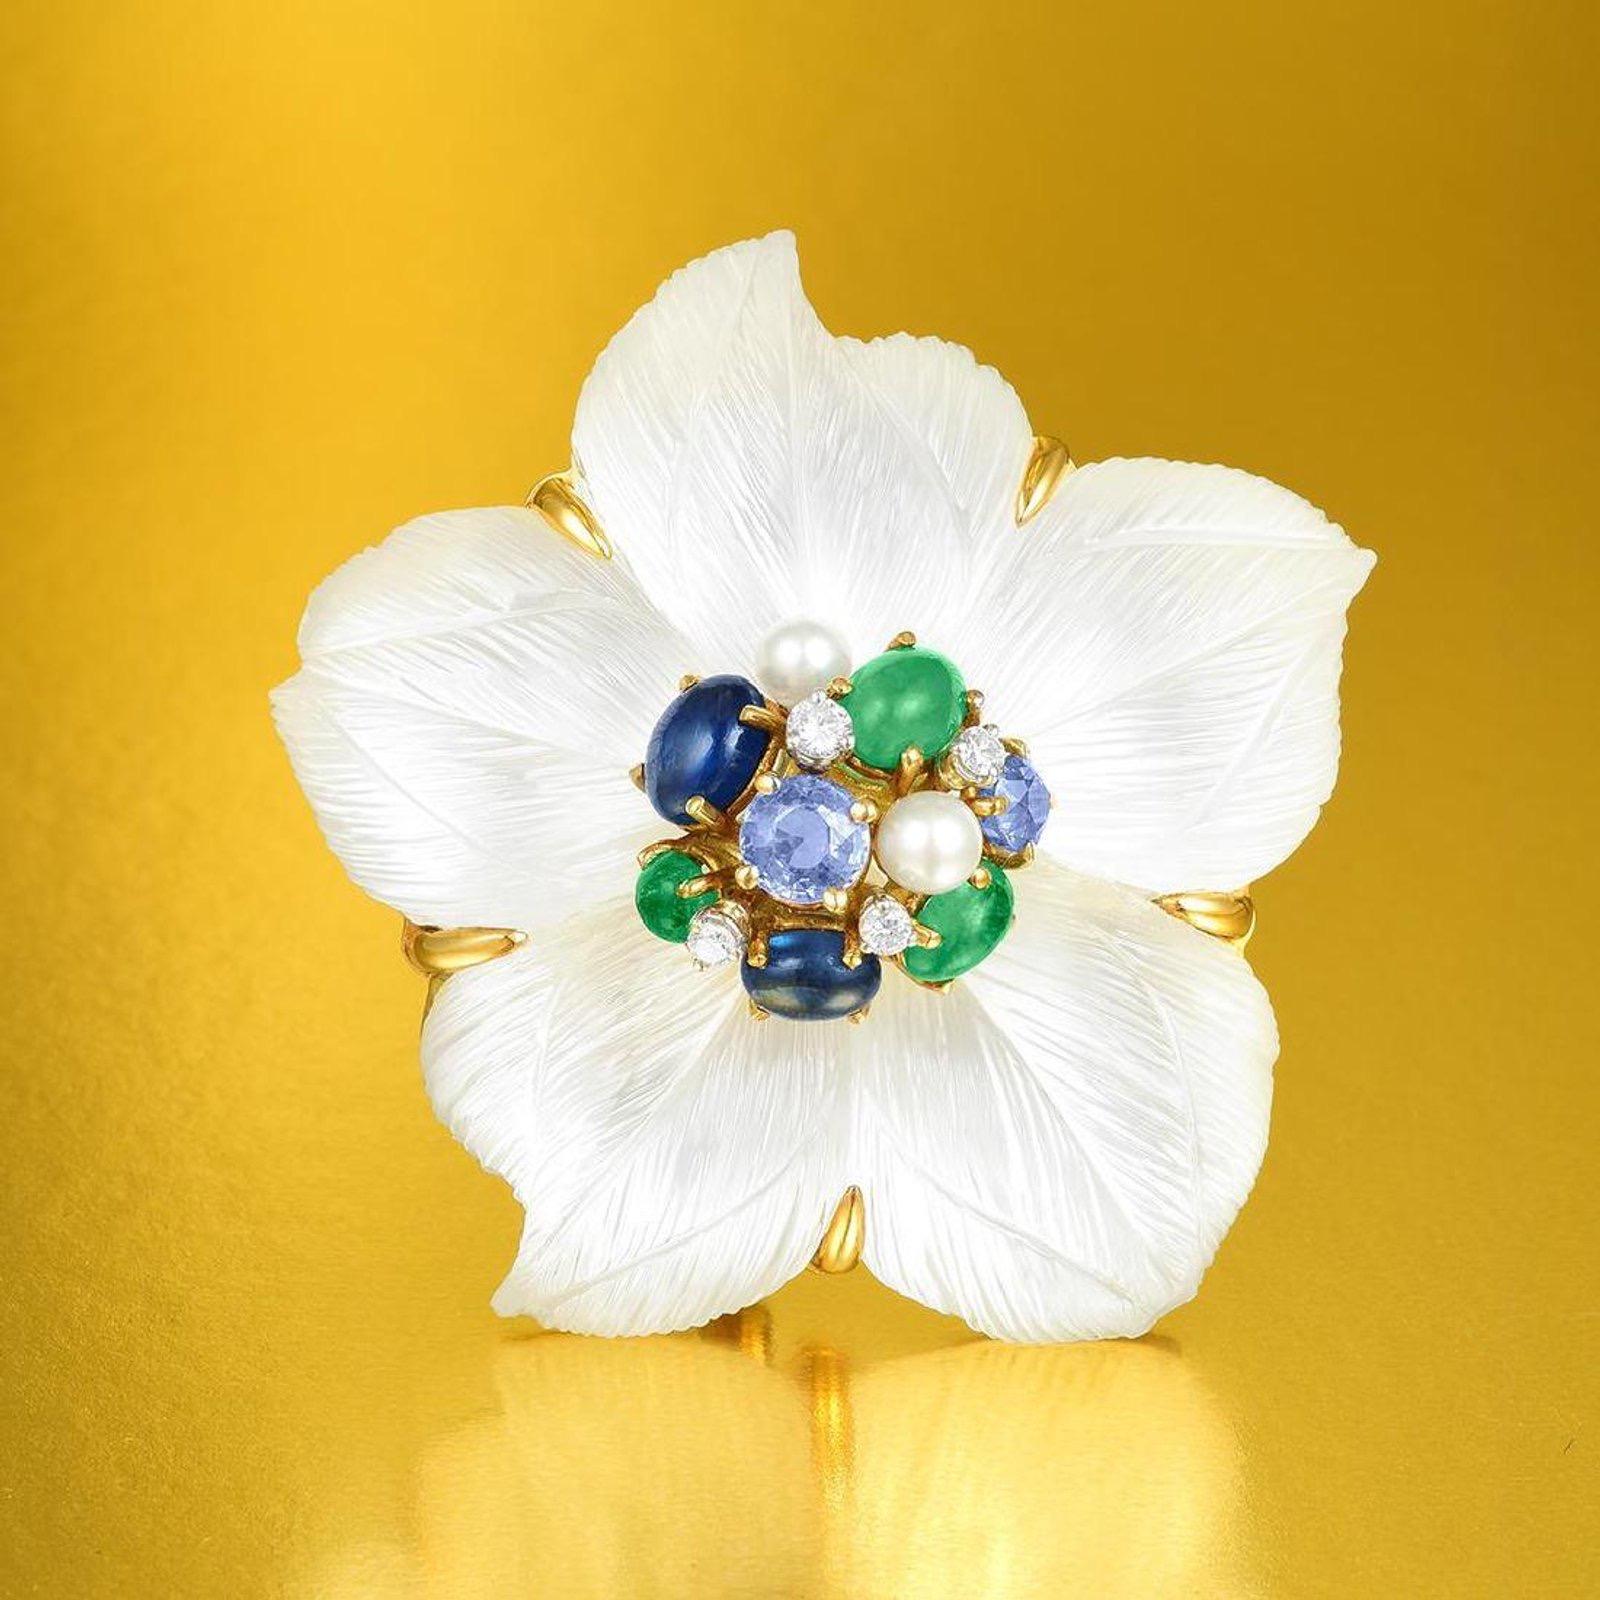 Seaman Schepps Clematis flower brooch in 18kt yellow gold with hand-carved rock crystal with mother of pearl underneath, sapphires, cultured pearls, diamonds and emeralds.